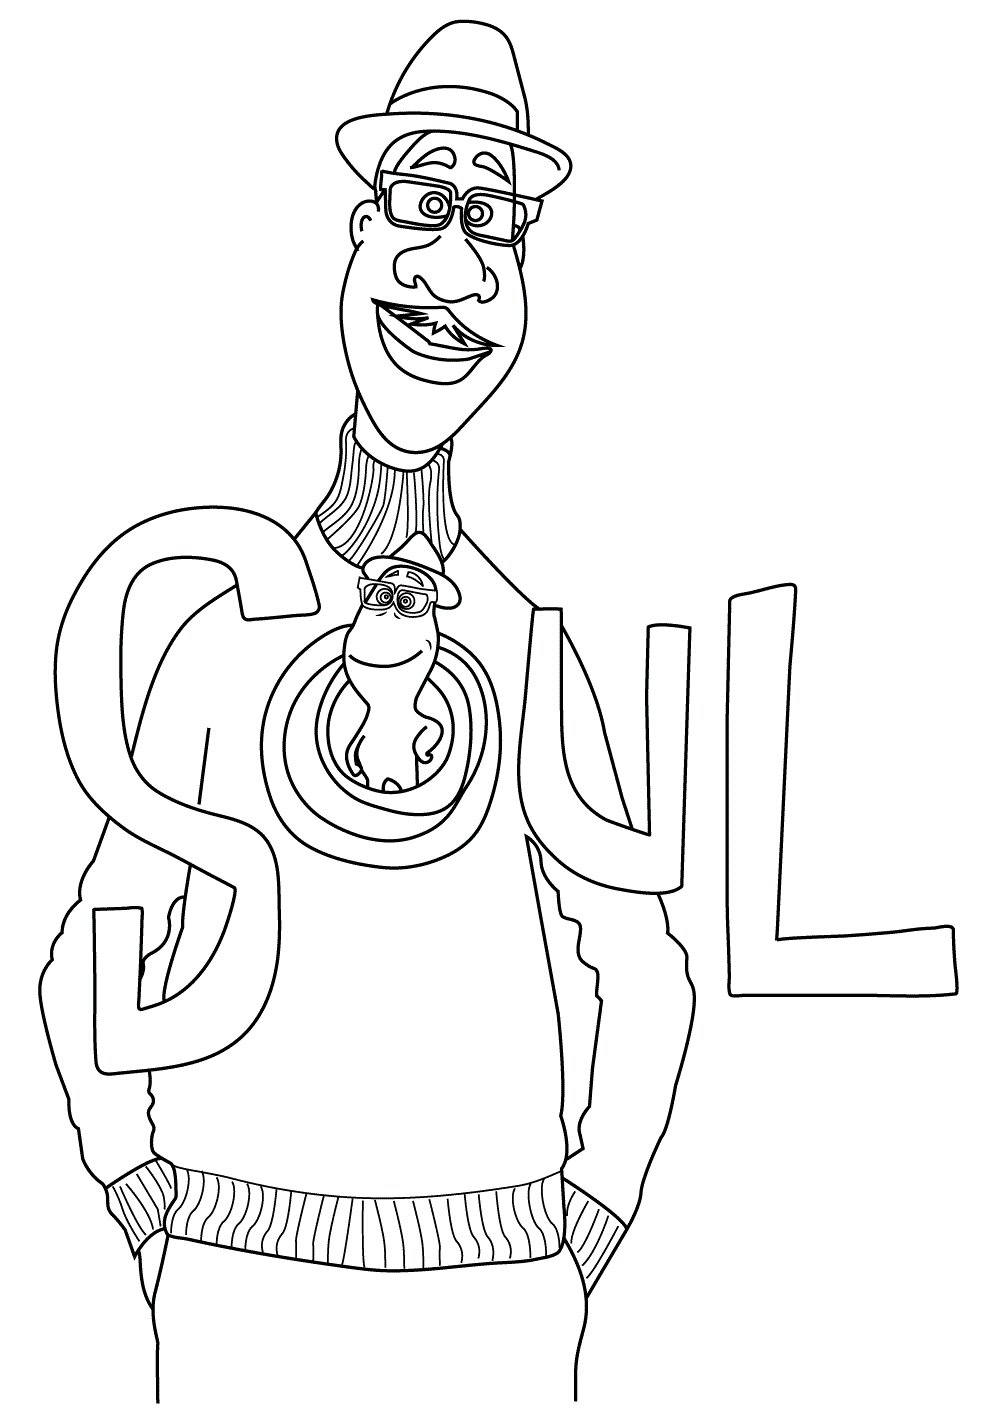 Joe from Soul Coloring Page